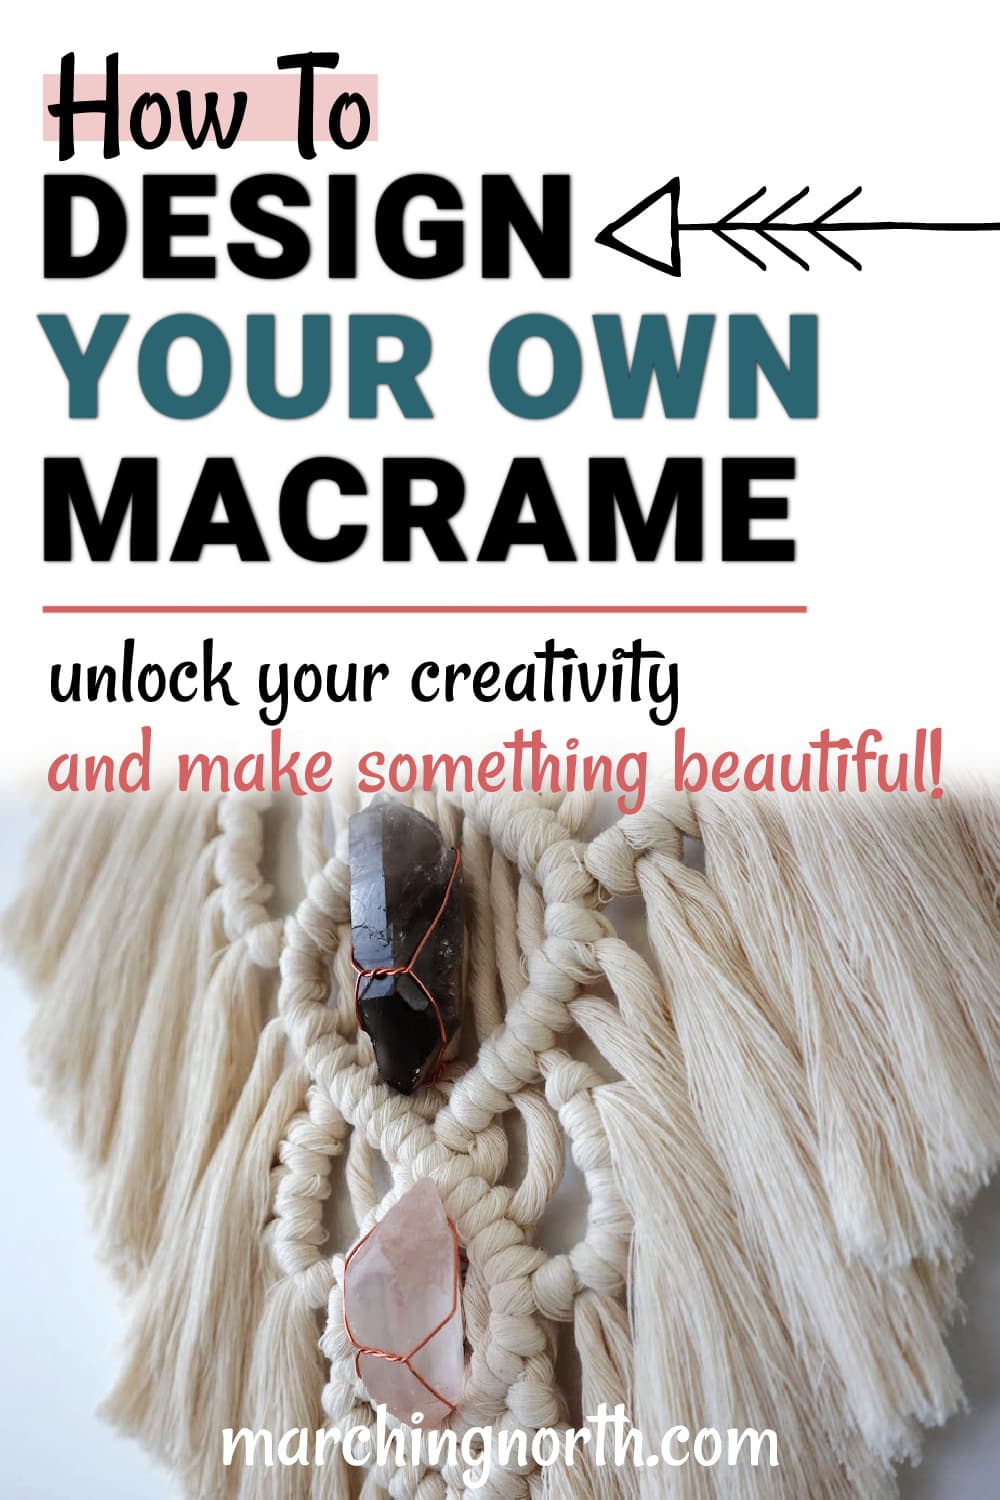 How to Design and Plan Your Own Macrame Patterns